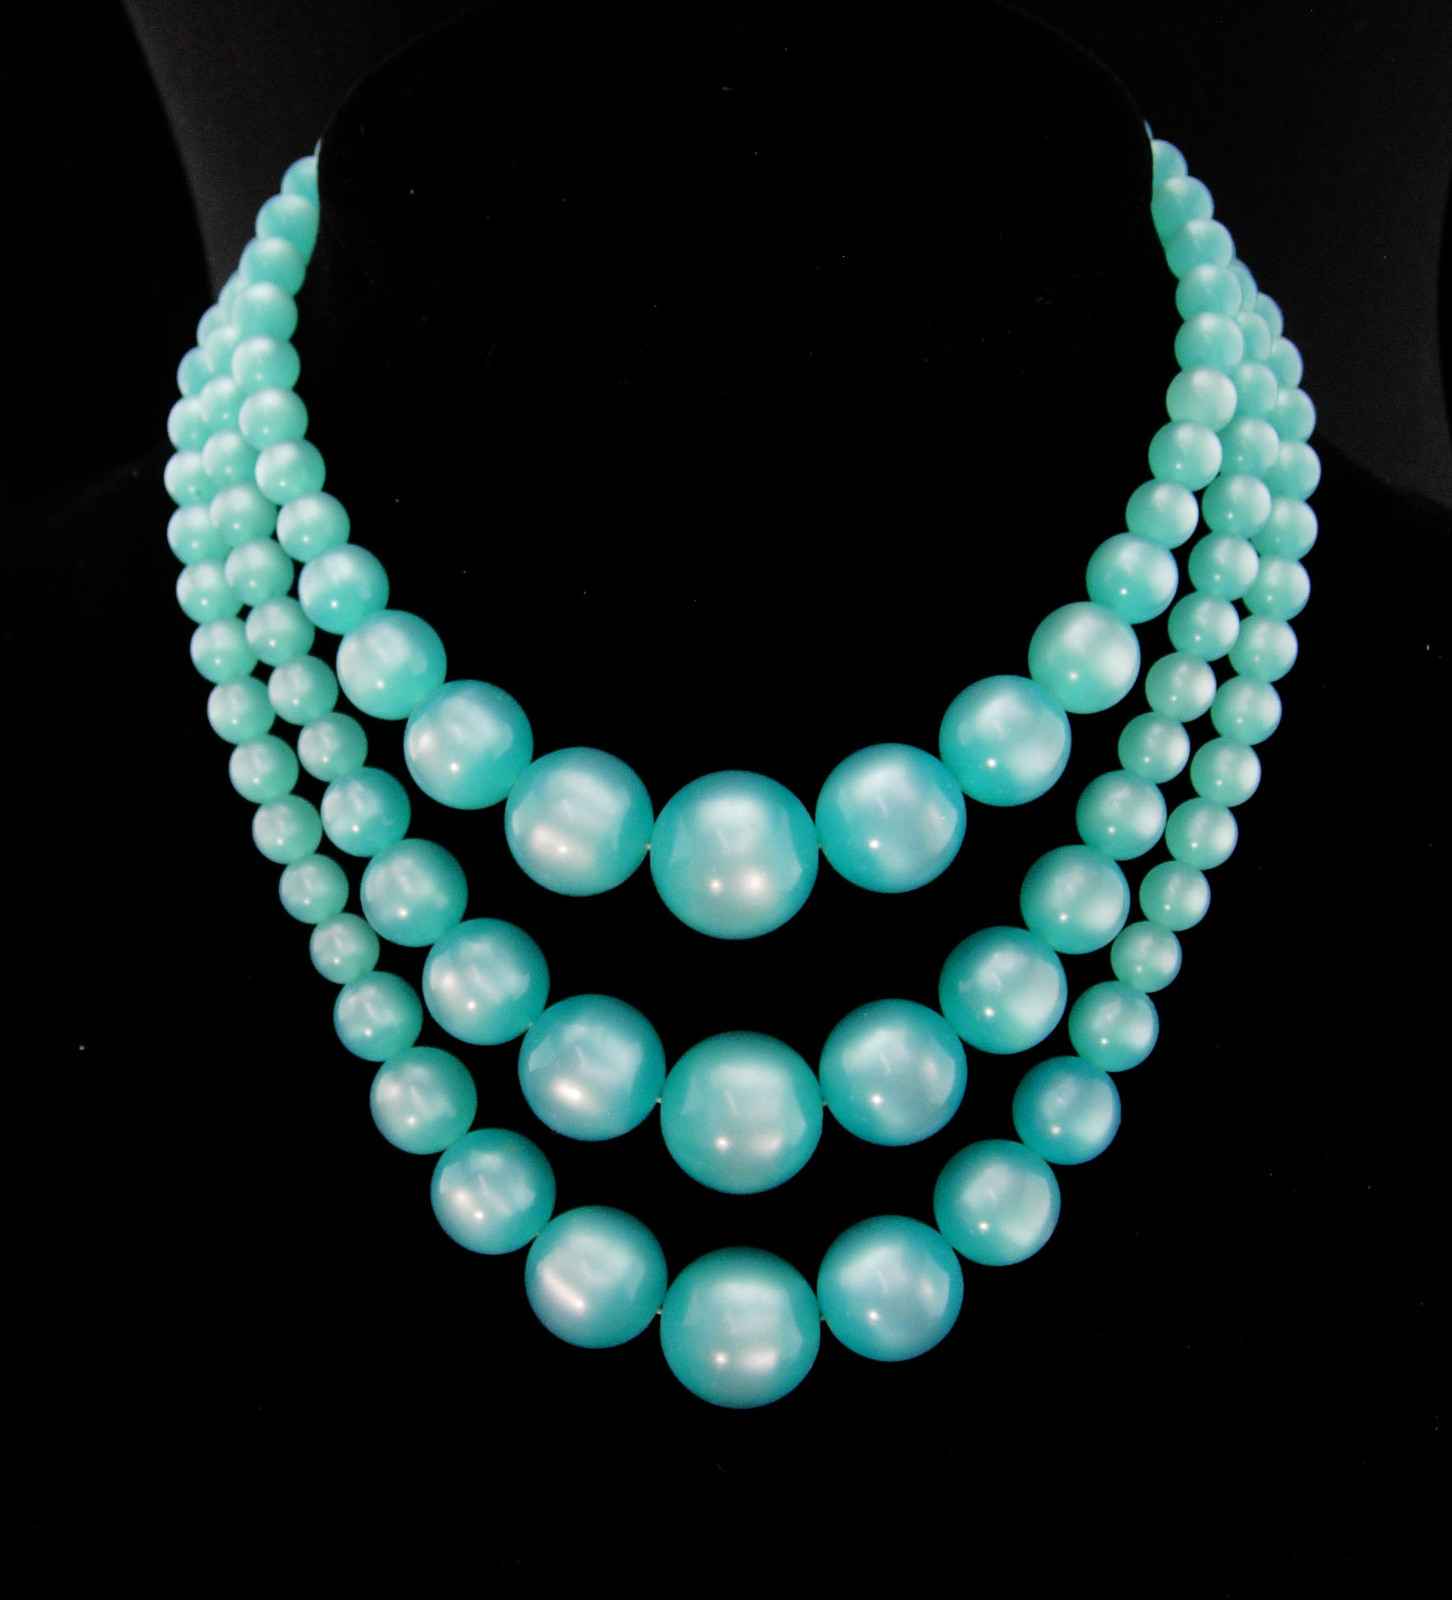 Primary image for Vintage moonglow necklace / turquoise 3 strand choker - retro aqua costume jewel